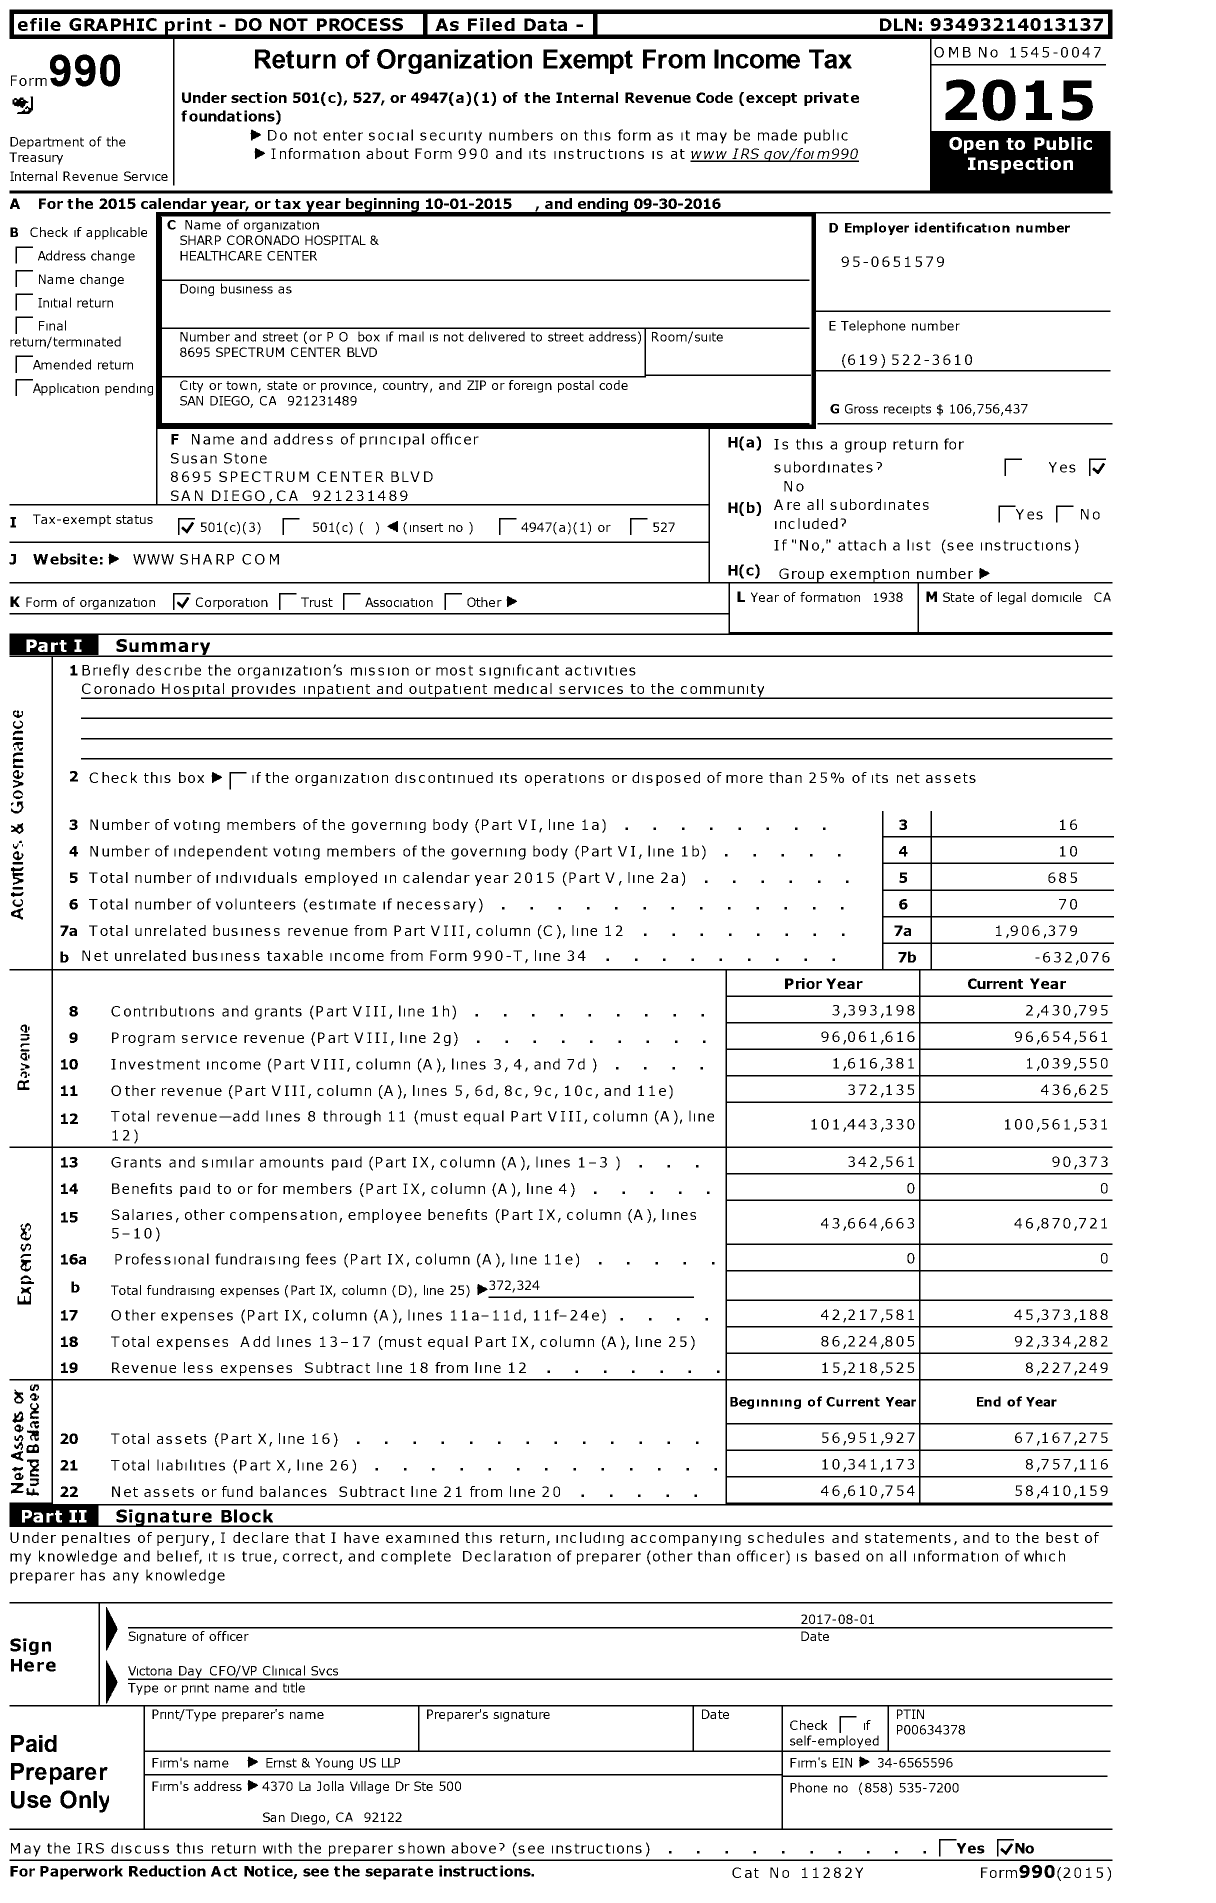 Image of first page of 2015 Form 990 for Sharp Coronado Hospital and Healthcare Center